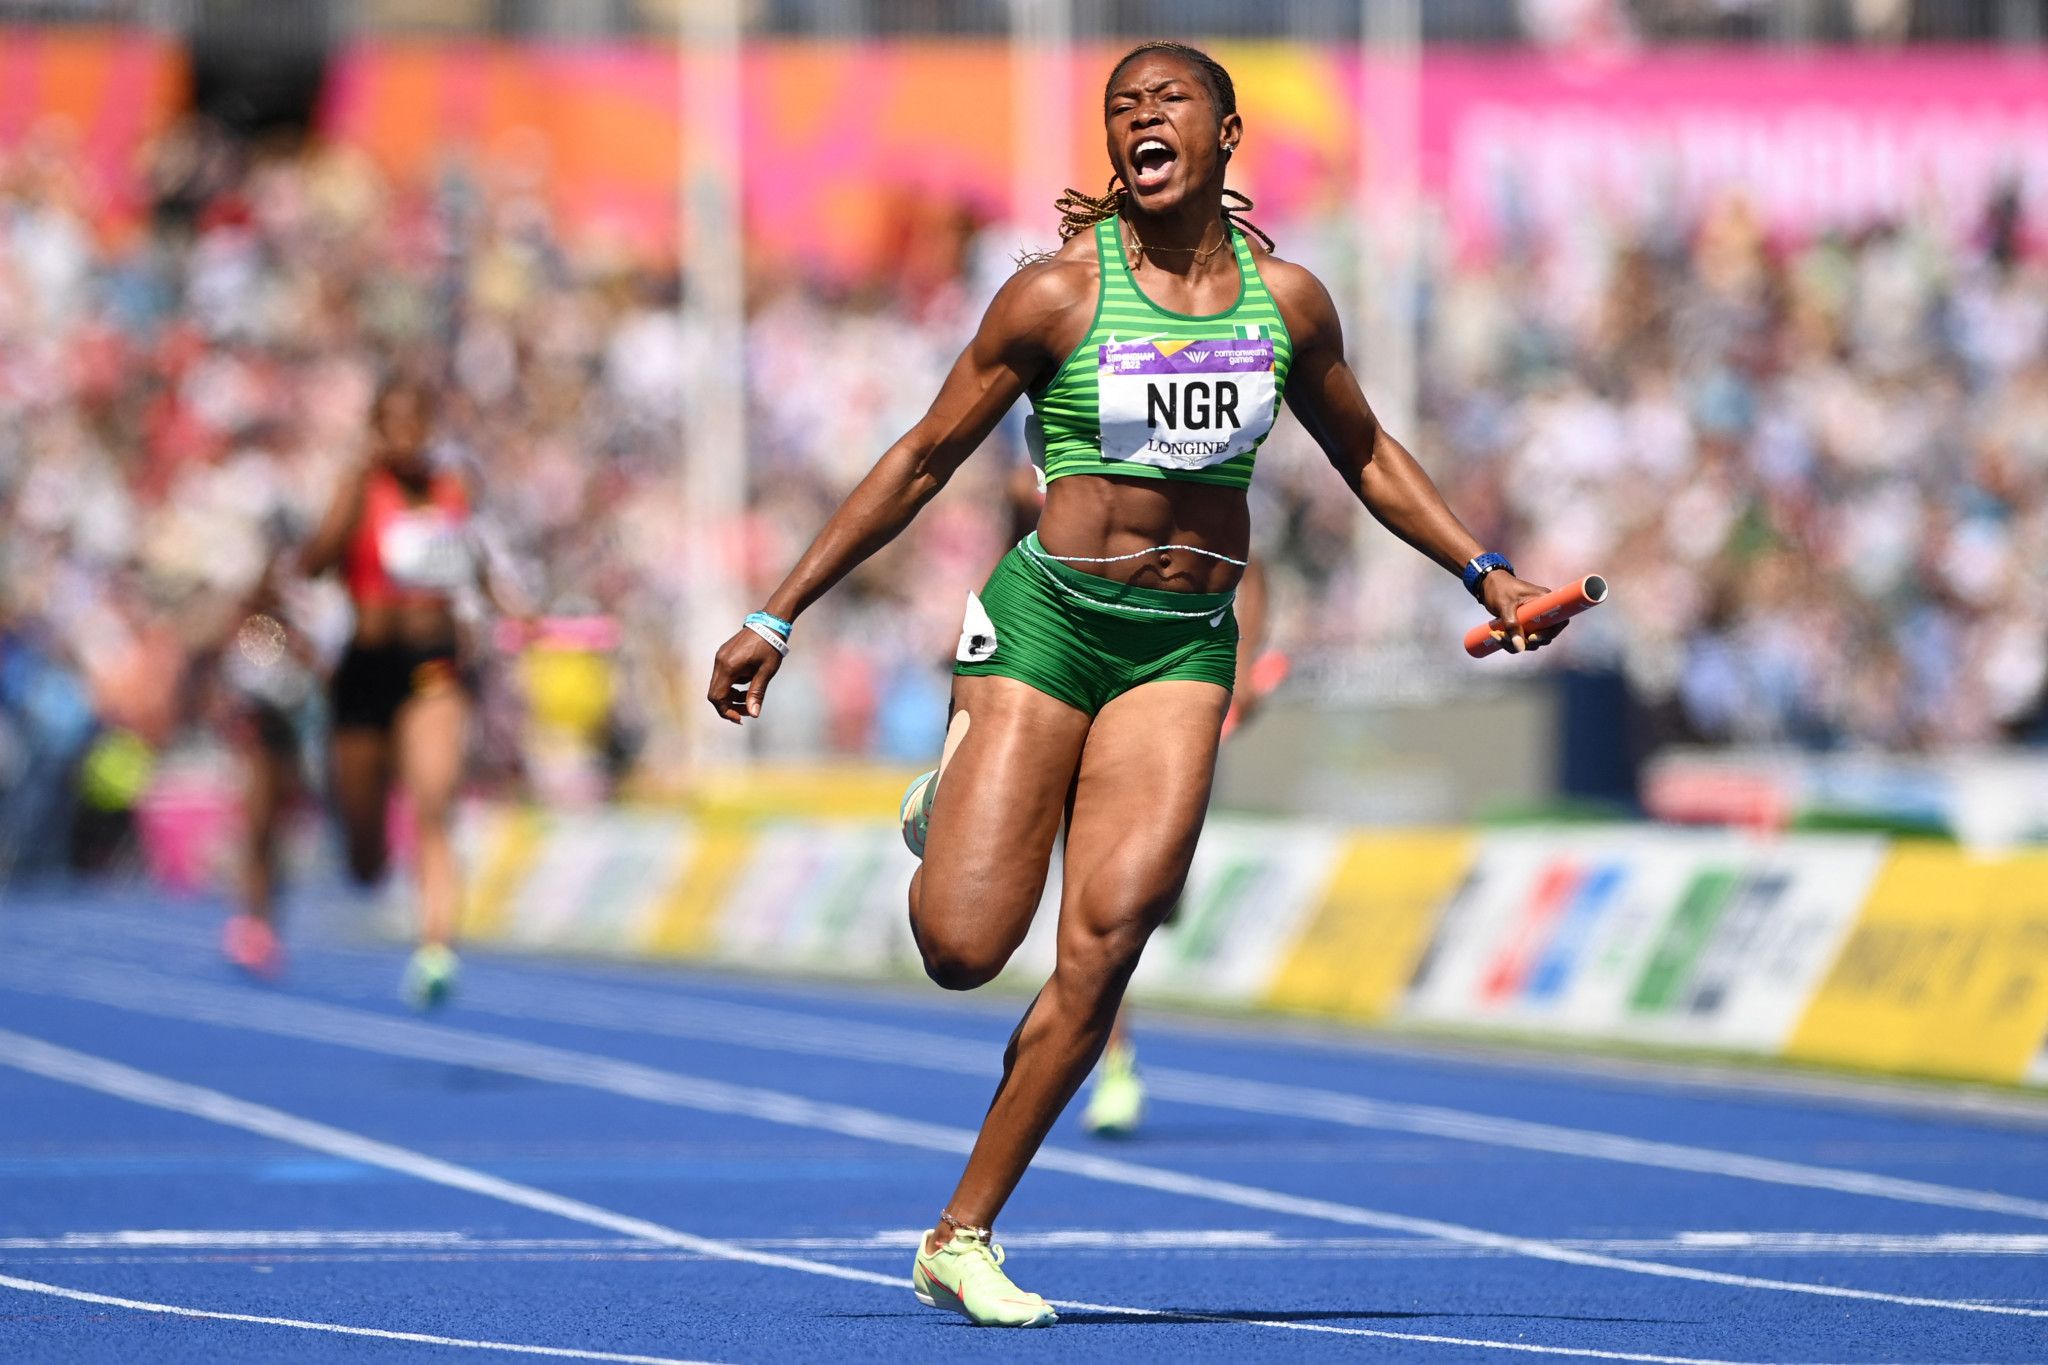 Nigeria's Nzubechi Grace Nwokocha crosses the line to anchor Nigeria to victory in the women's 4x100m relay at Birmingham, but they have now been stripped of the gold after her positive drugs test ©Getty Images